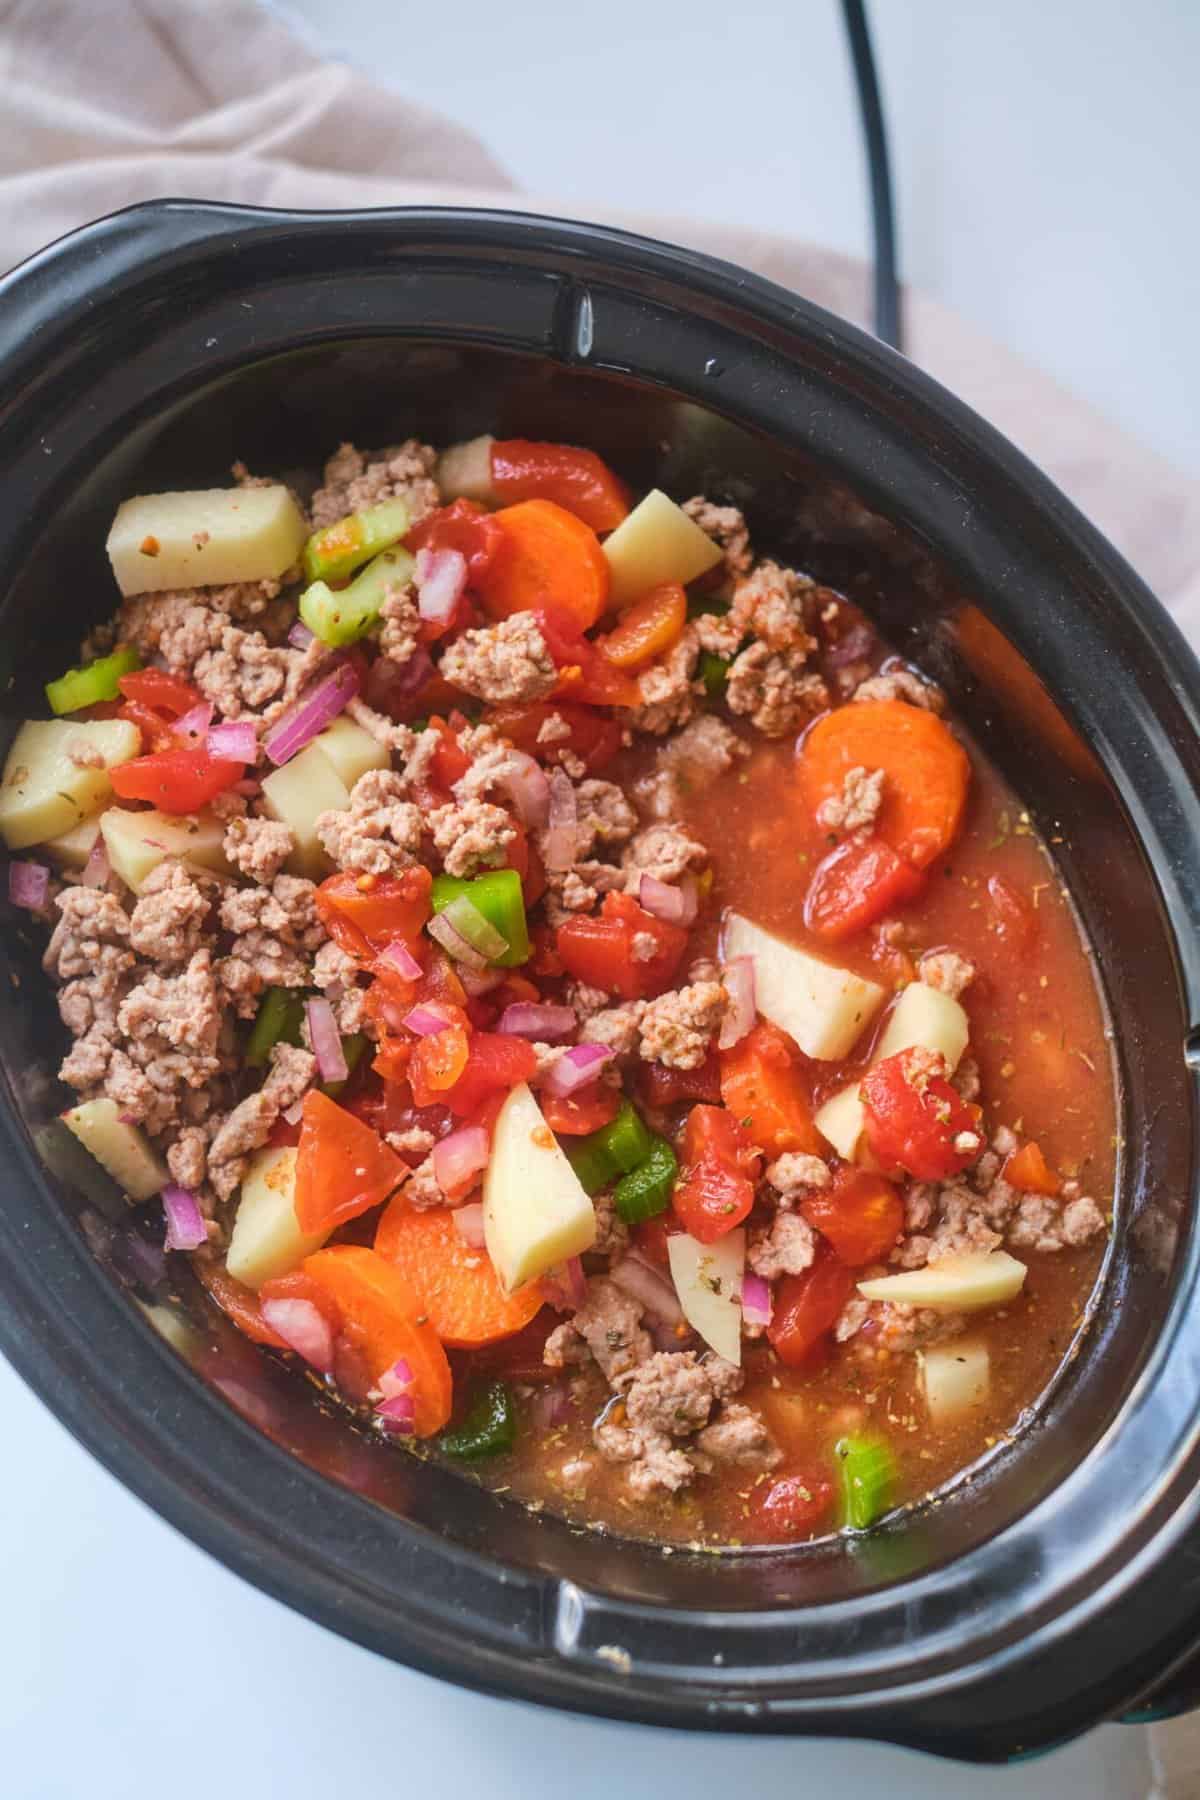 10 Best Crockpot Recipes for Camping - Best of Crock